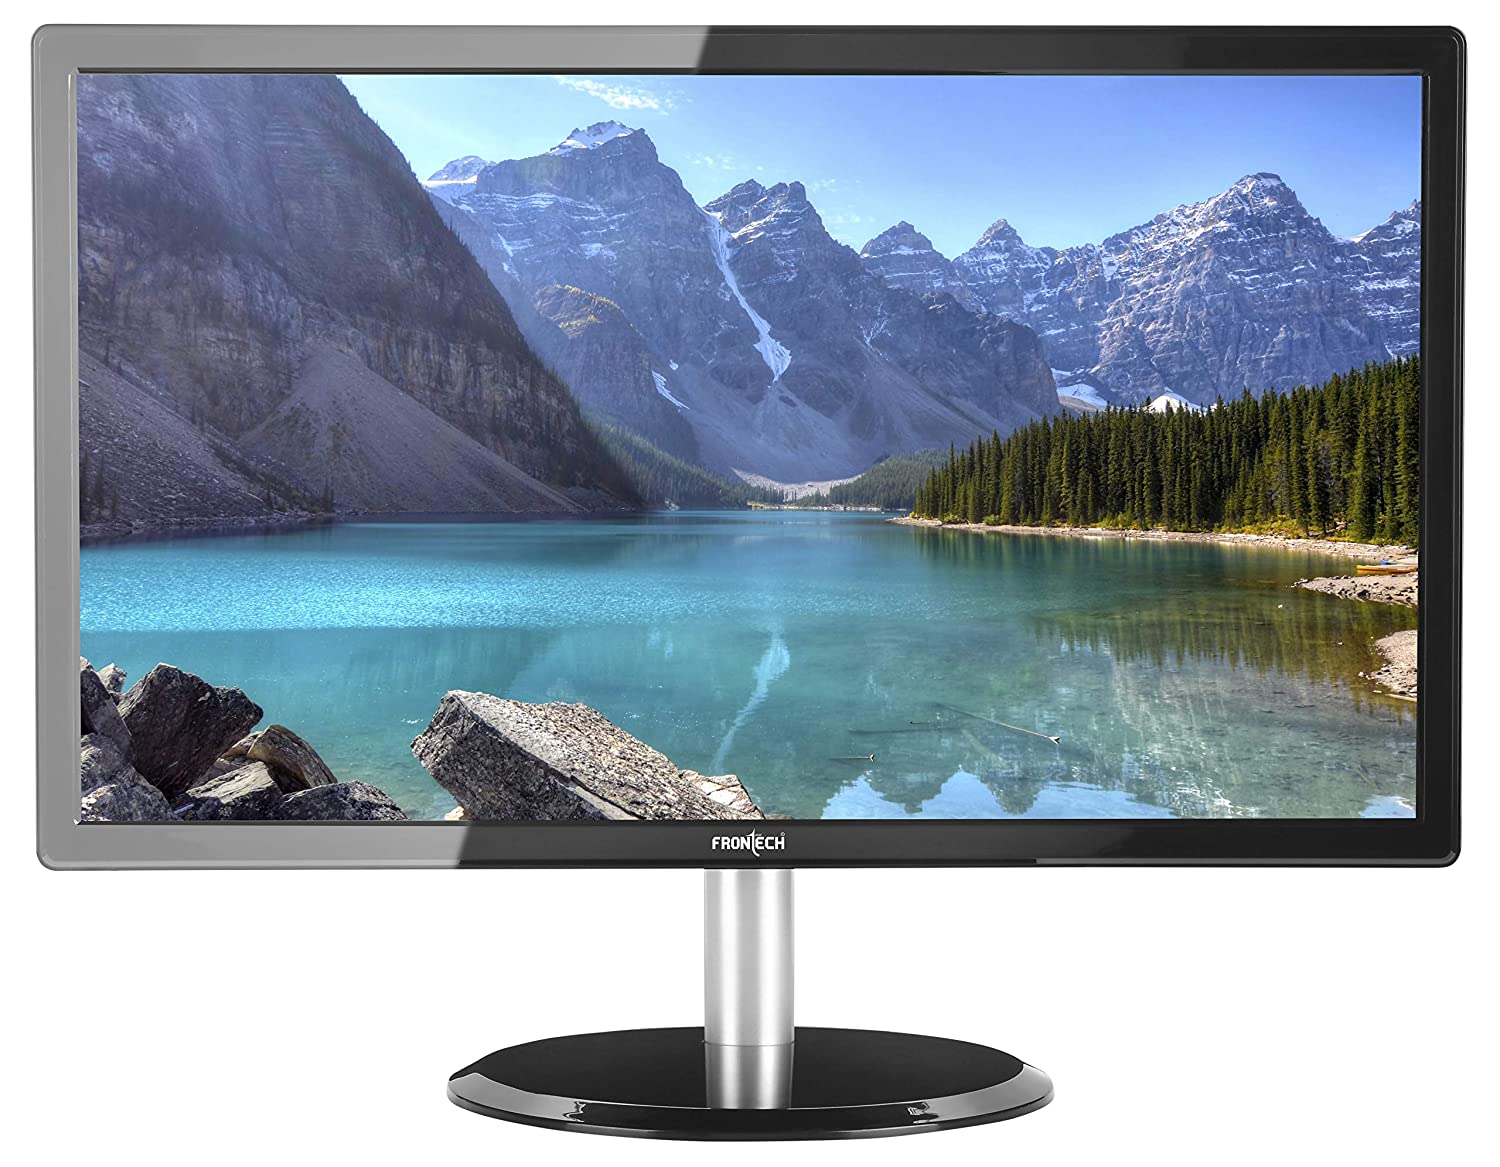 Frontech 20 Inch LED Monitor